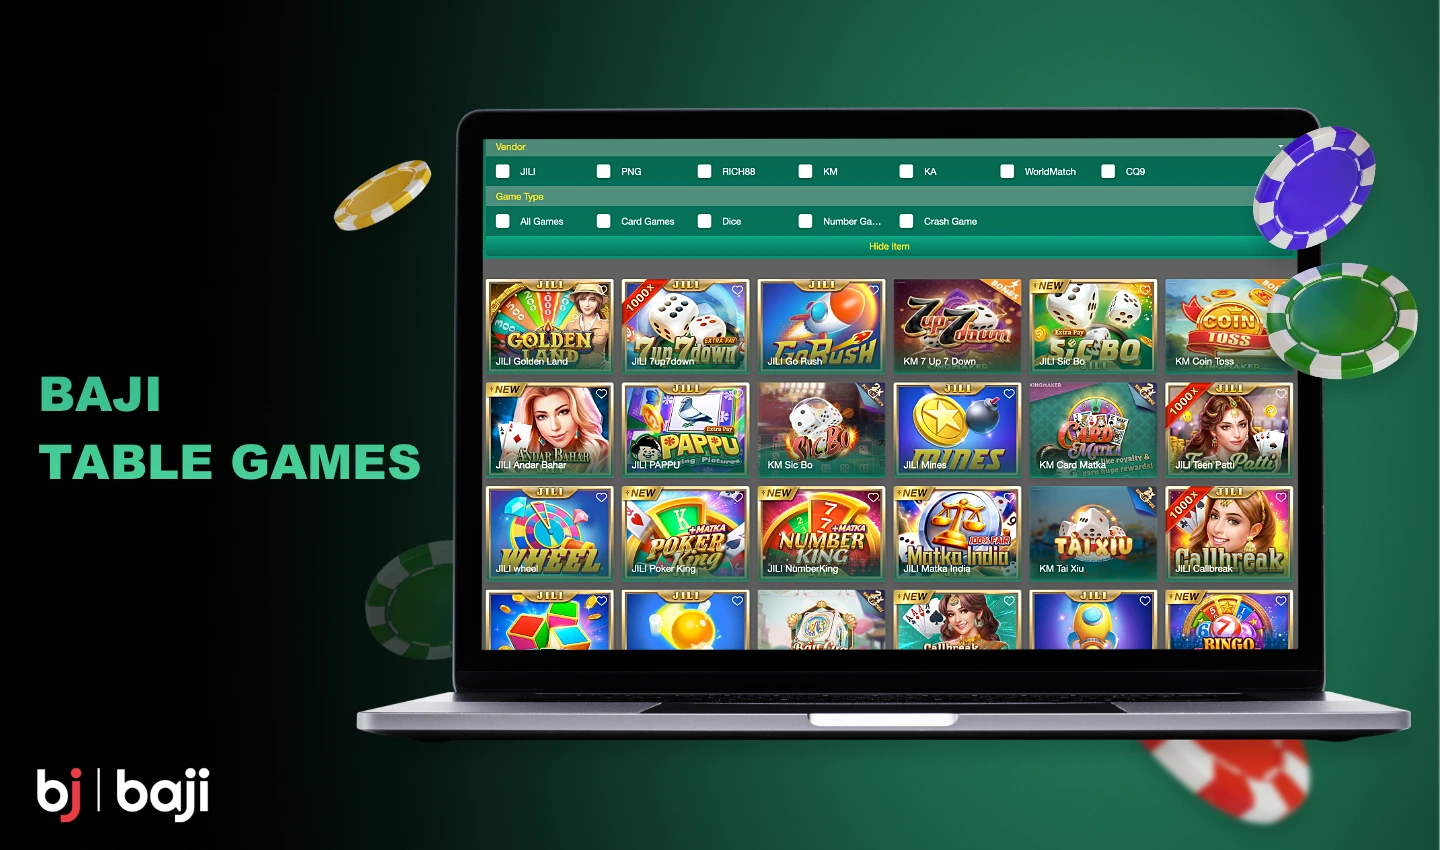 Fans of table games will love the separate section at Baji Casino, which contains the most exciting games of this genre